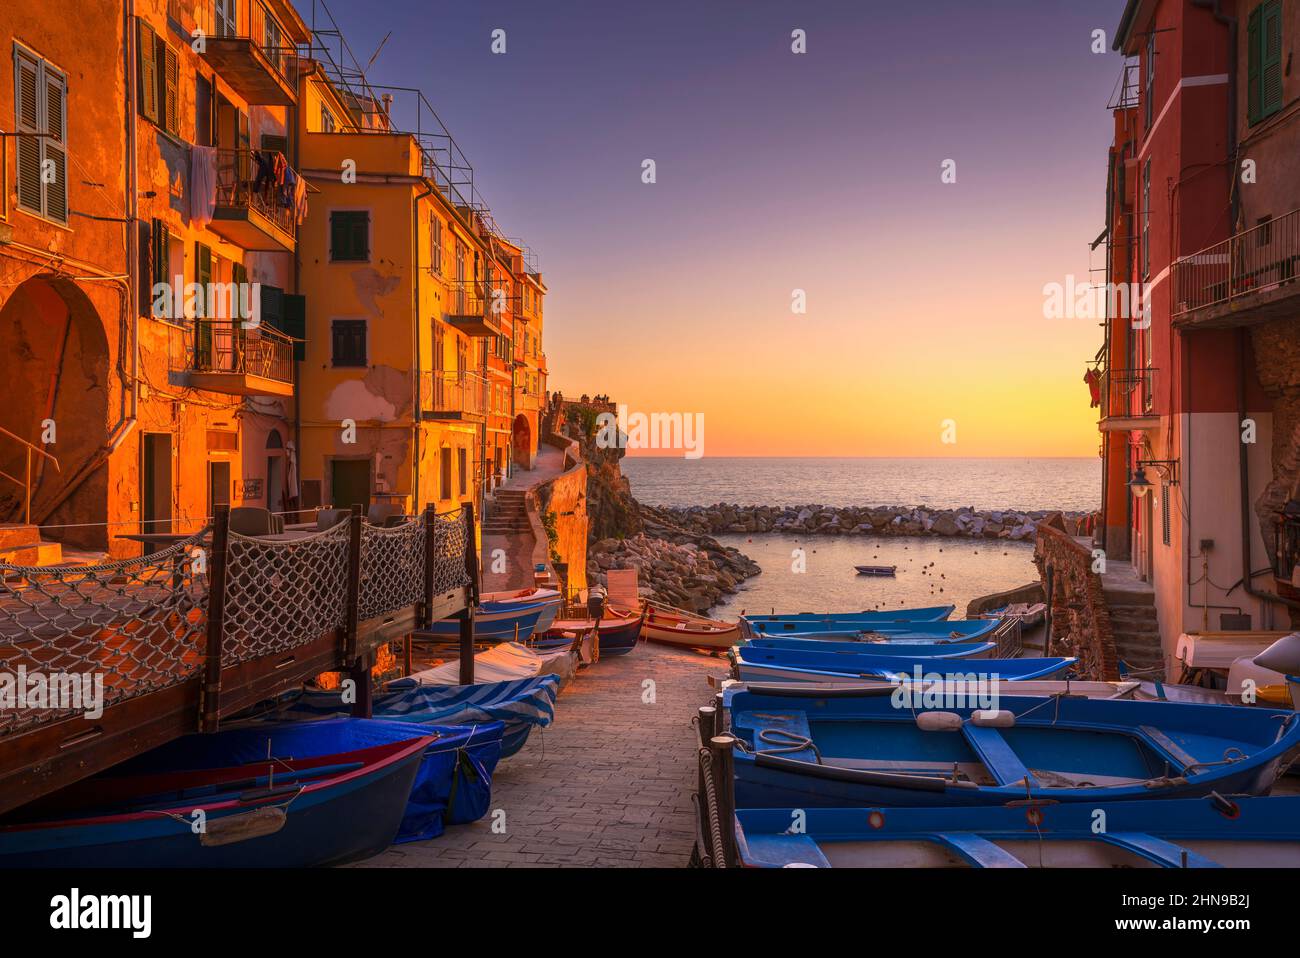 Riomaggiore village street, boats and sea in at sunset, Cinque Terre National Park, Liguria region, Italy, Europe. Stock Photo